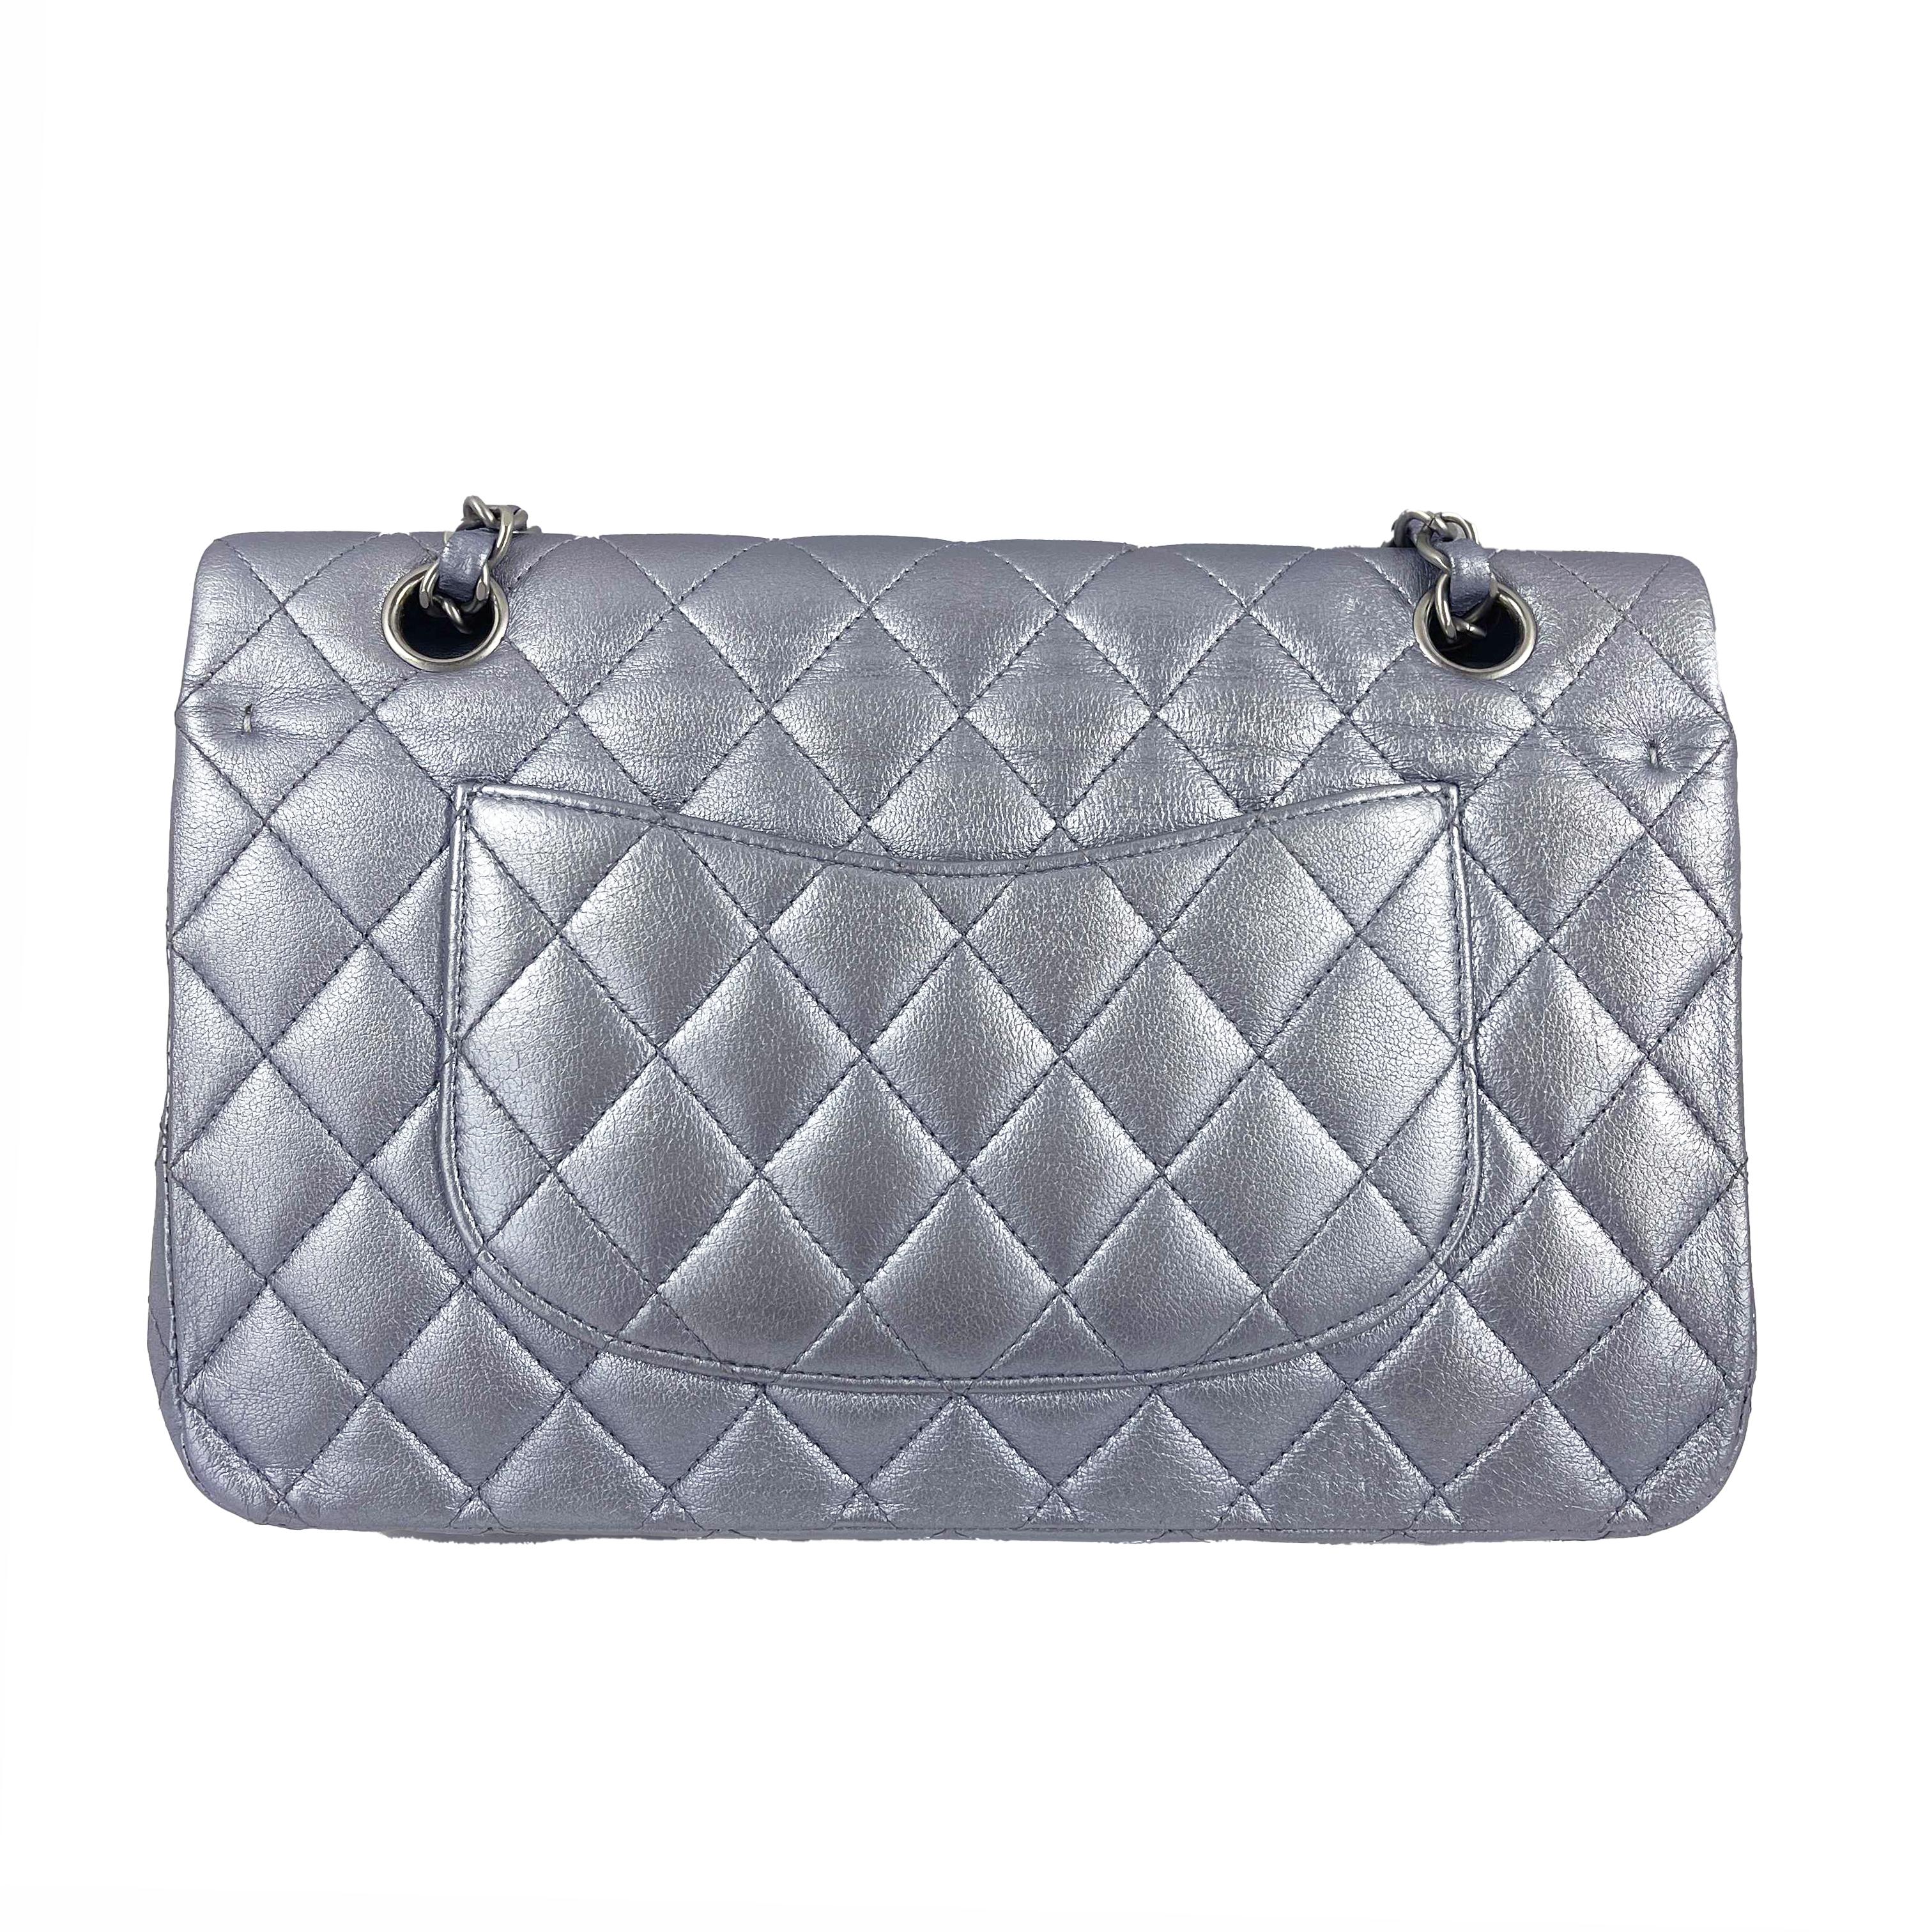 CHANEL - Excellent - Classic Double Flap Metallic Quilted Leather - Pale Metallic Purple, Silver-Toned Hardware - Handbag

Description

This Chanel classic flap handbag is from the 2010 to 2011 collection.
It is crafted with pale metallic purple